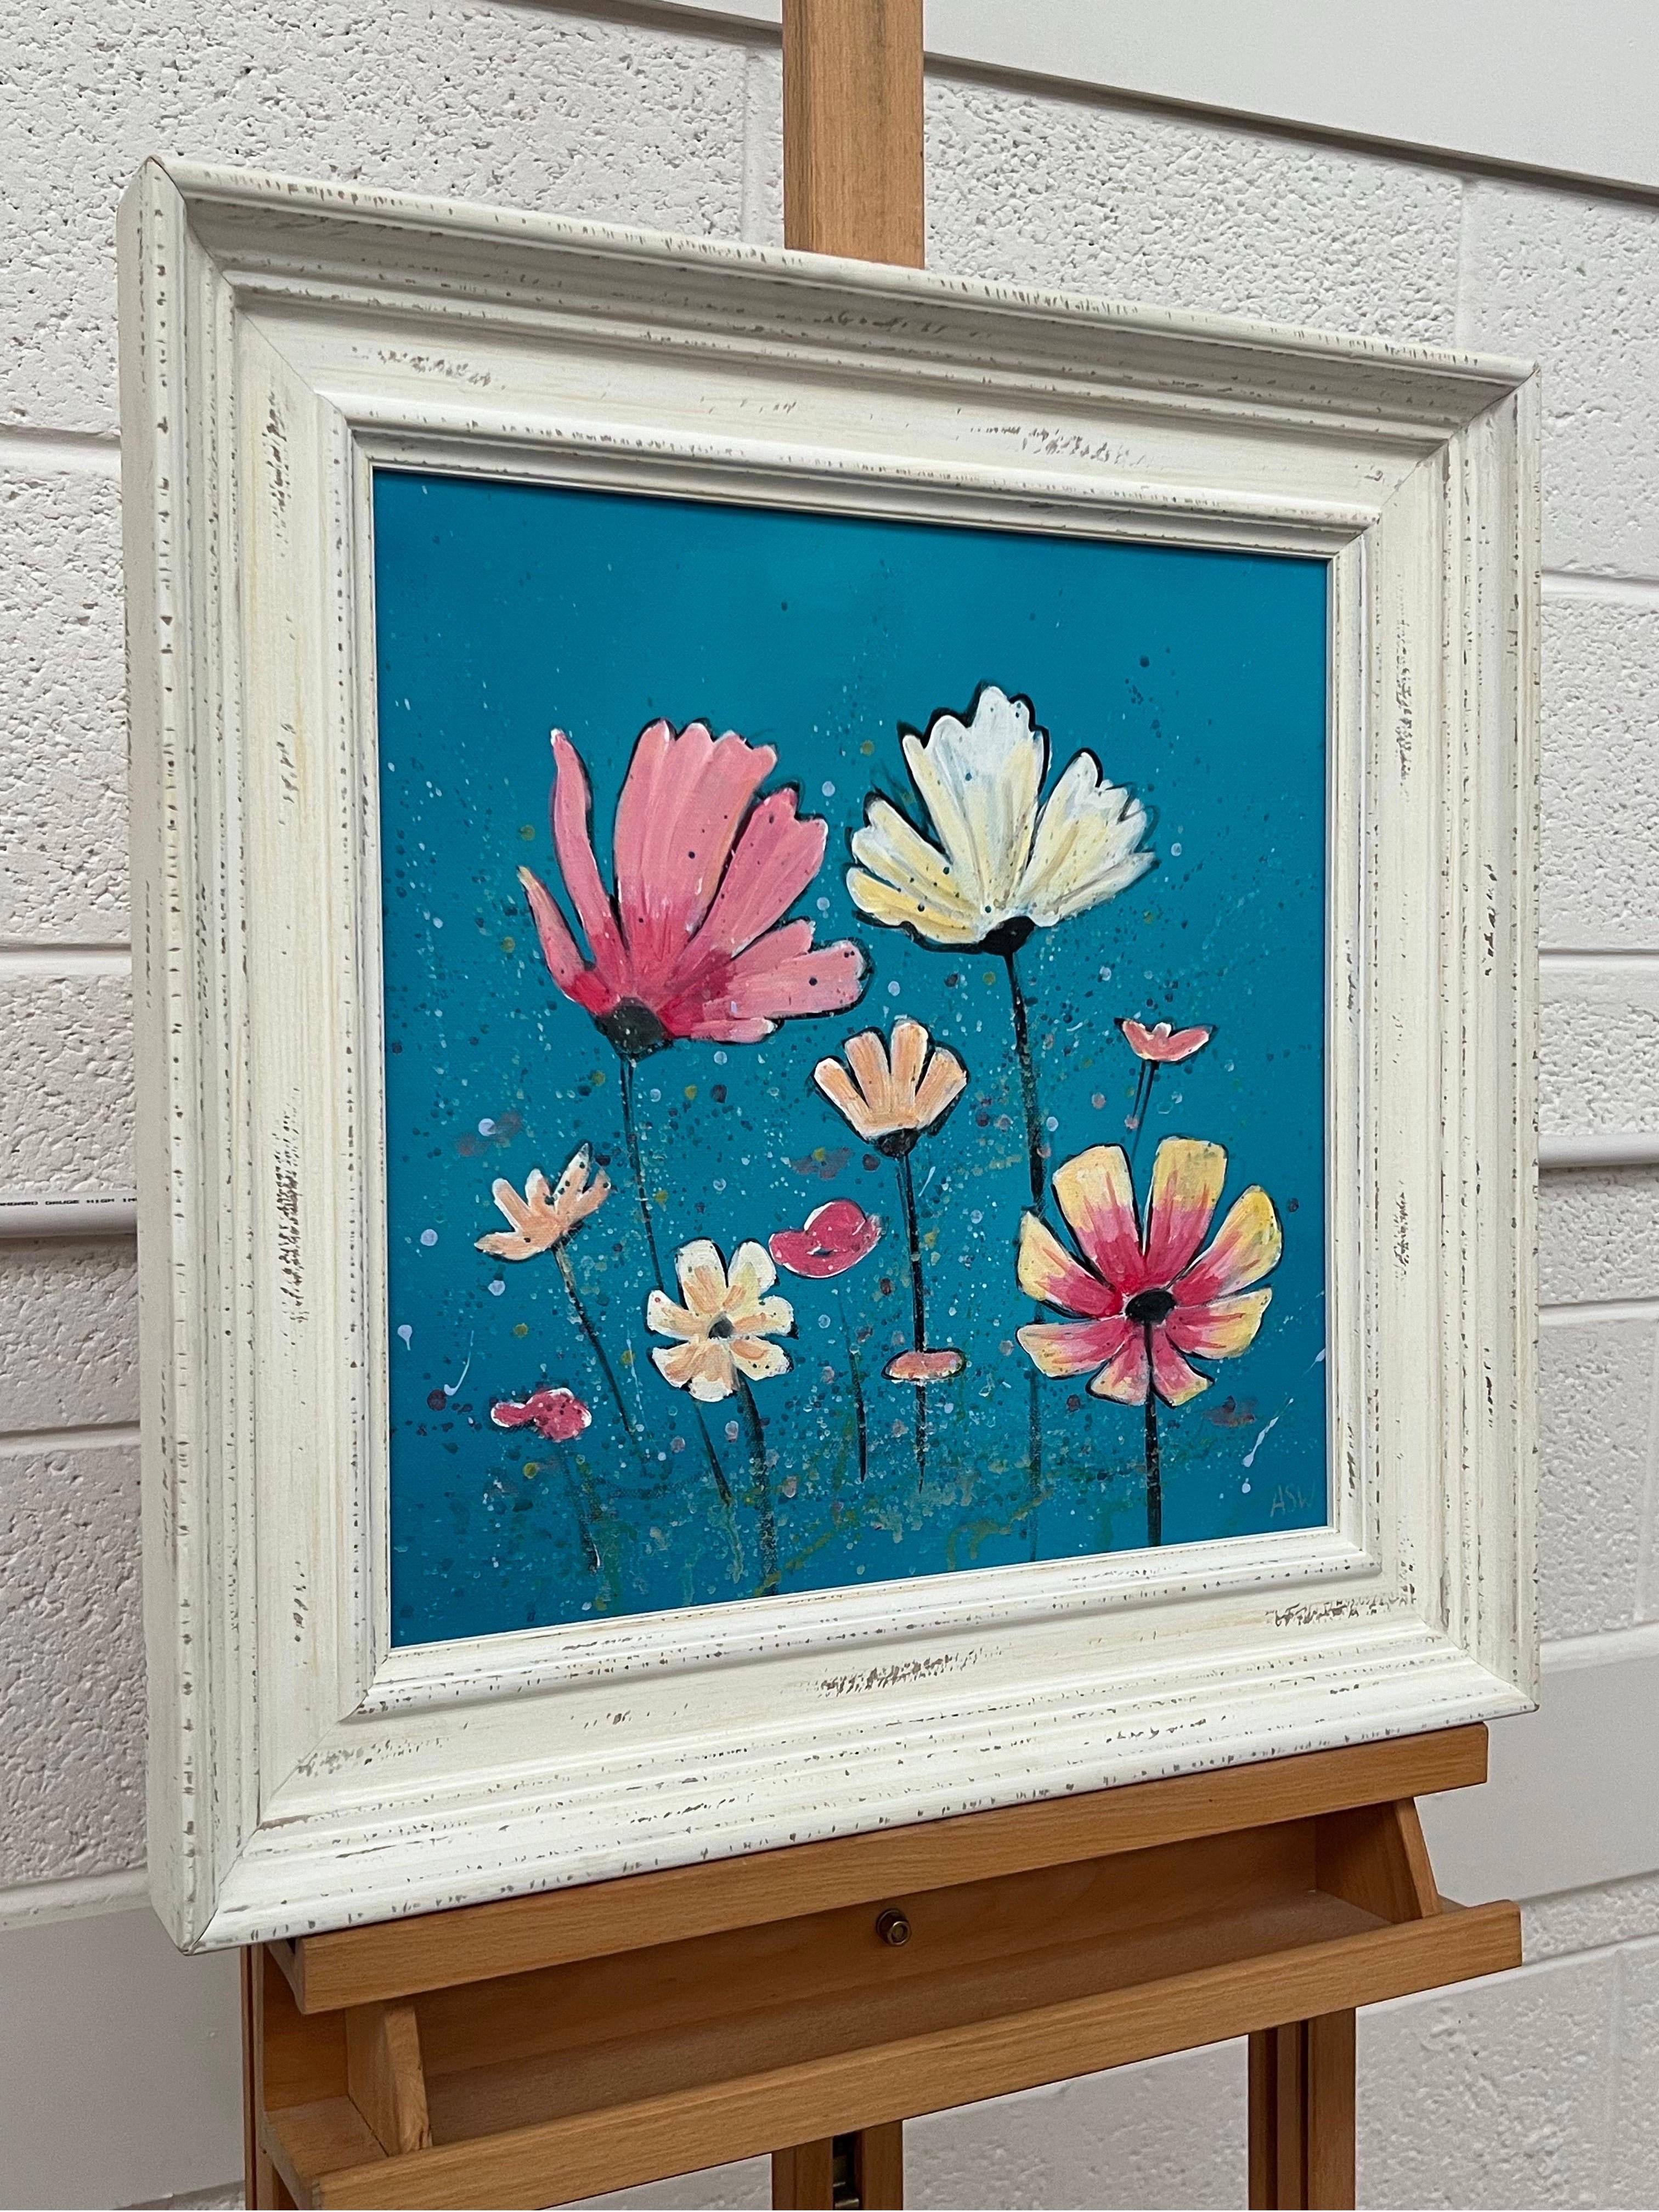 Design Study of Wild Pink & White Flowers on Turquoise by Contemporary Artist - Painting by Angela Wakefield